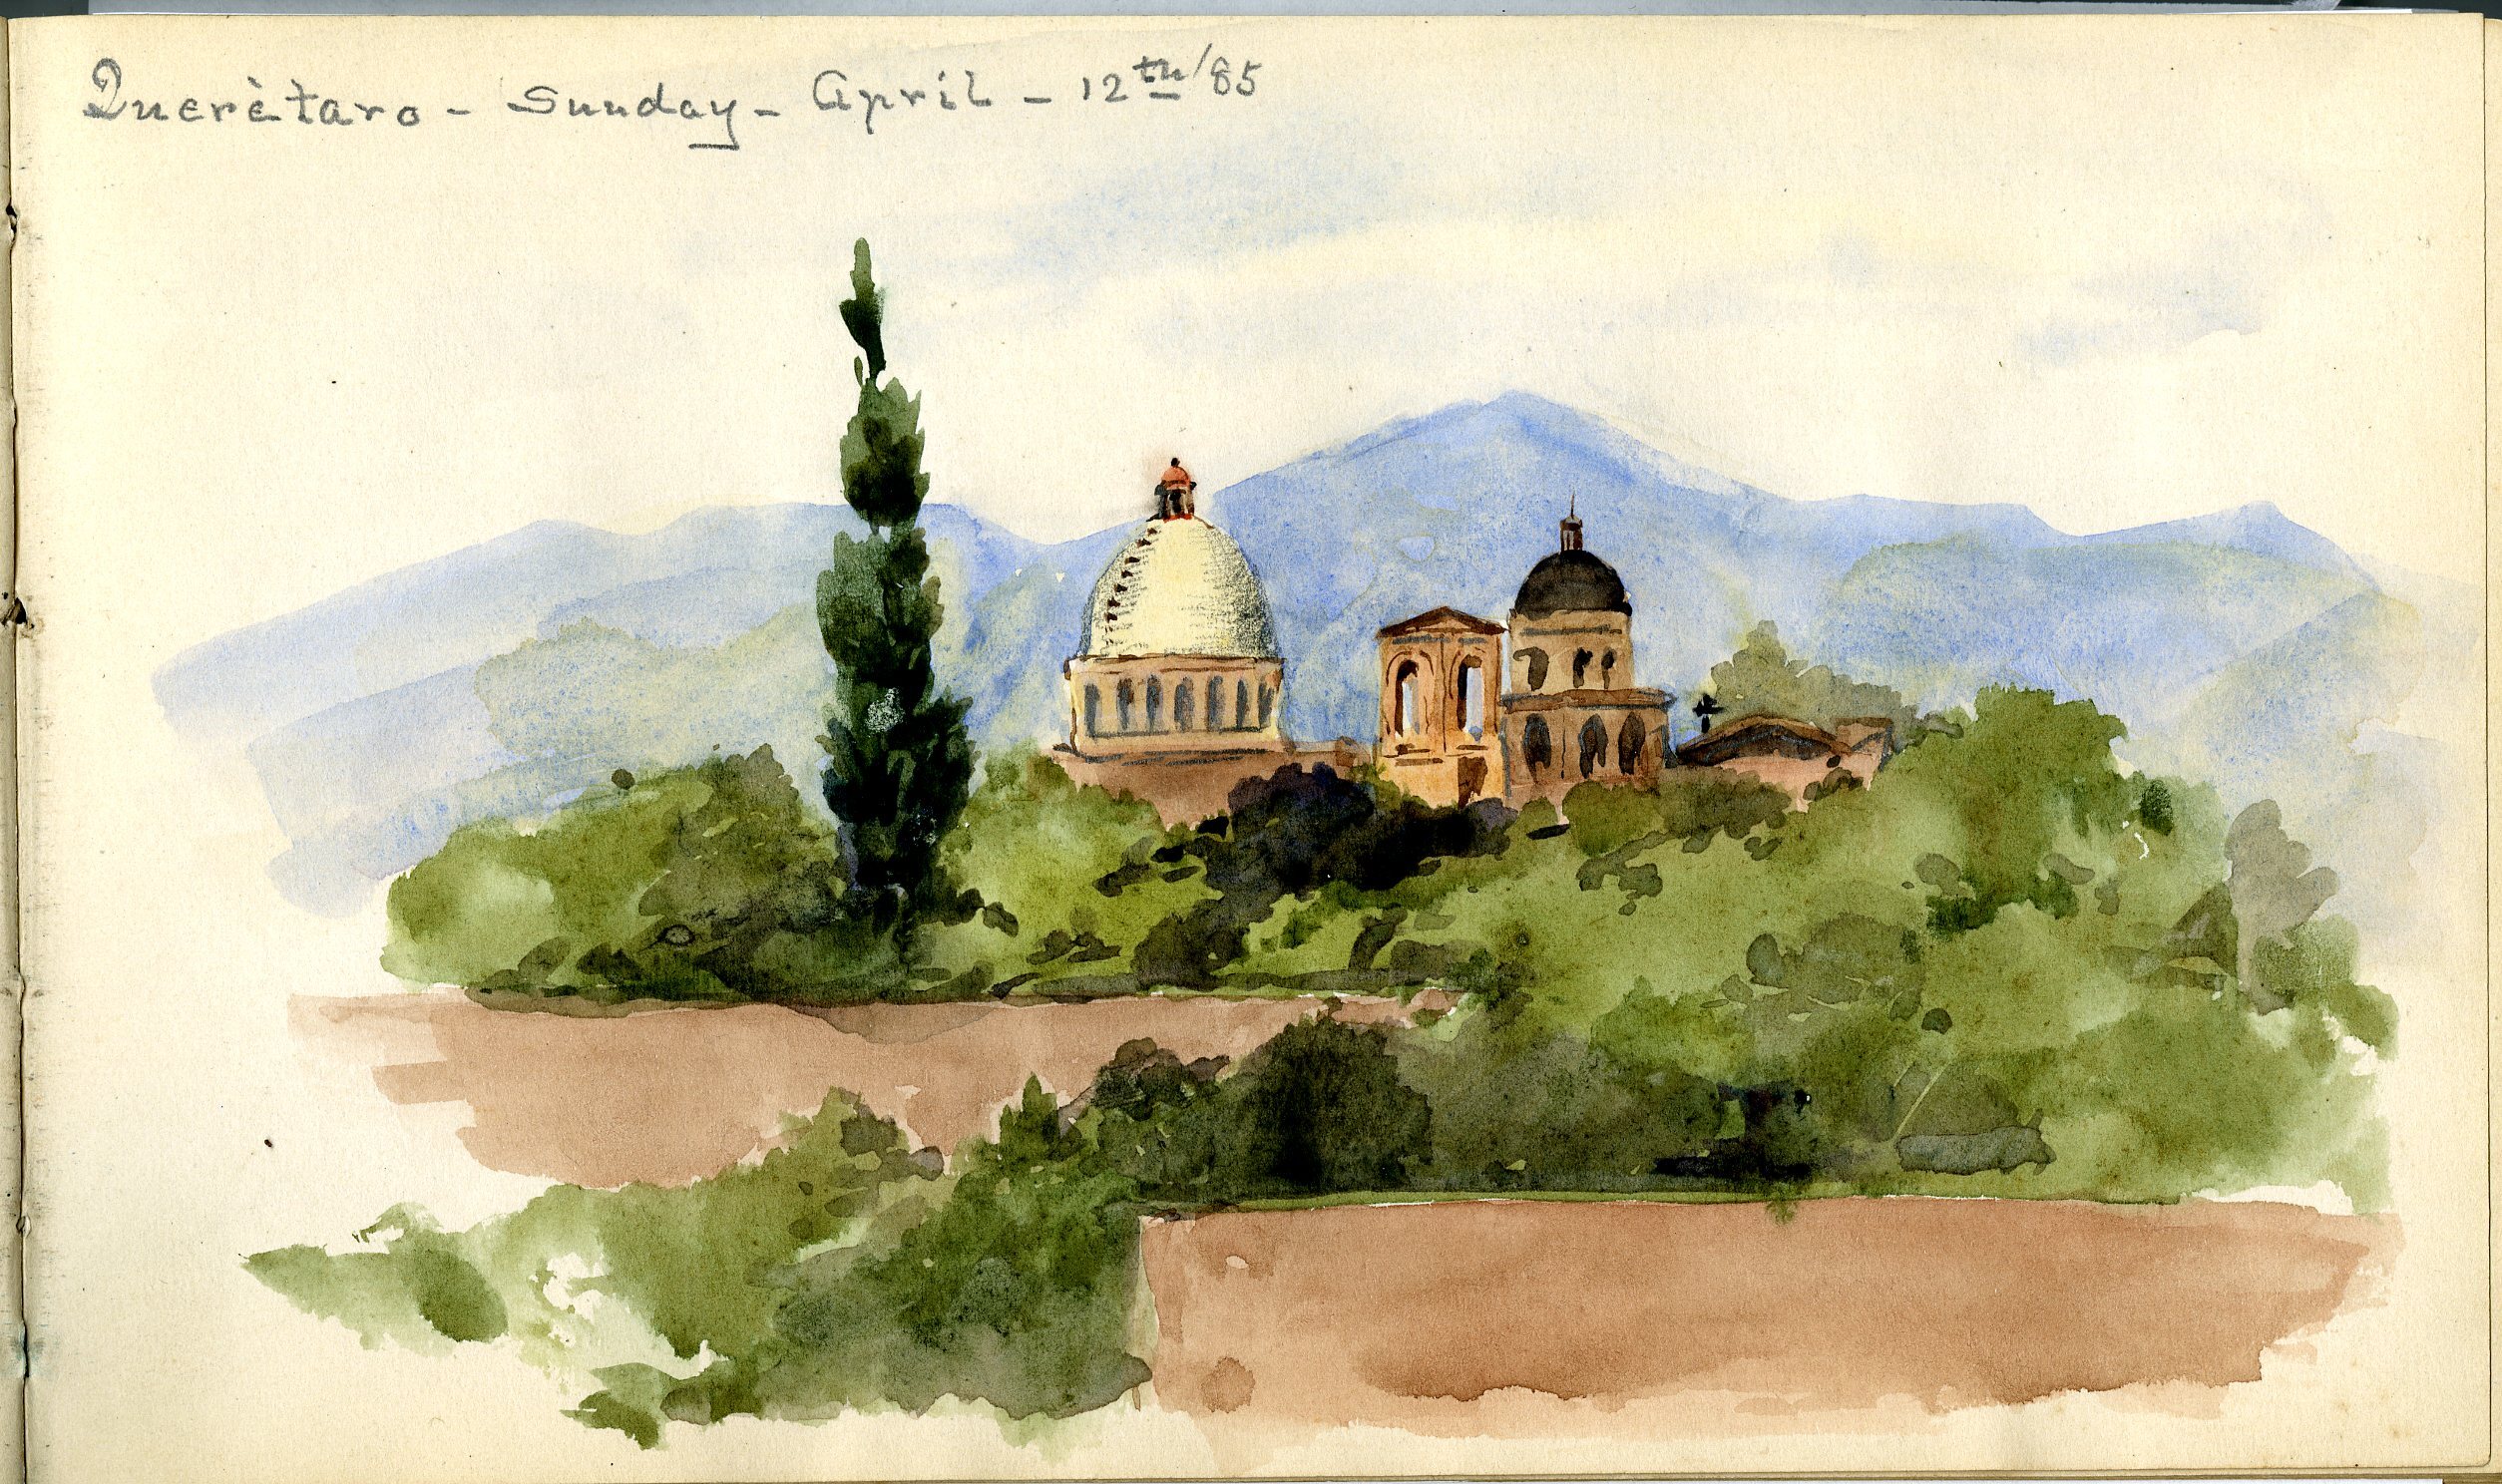 Watercolor of landscape in tan and greens. Tall columnar tree stands next to several tan adobe buildings with domes.